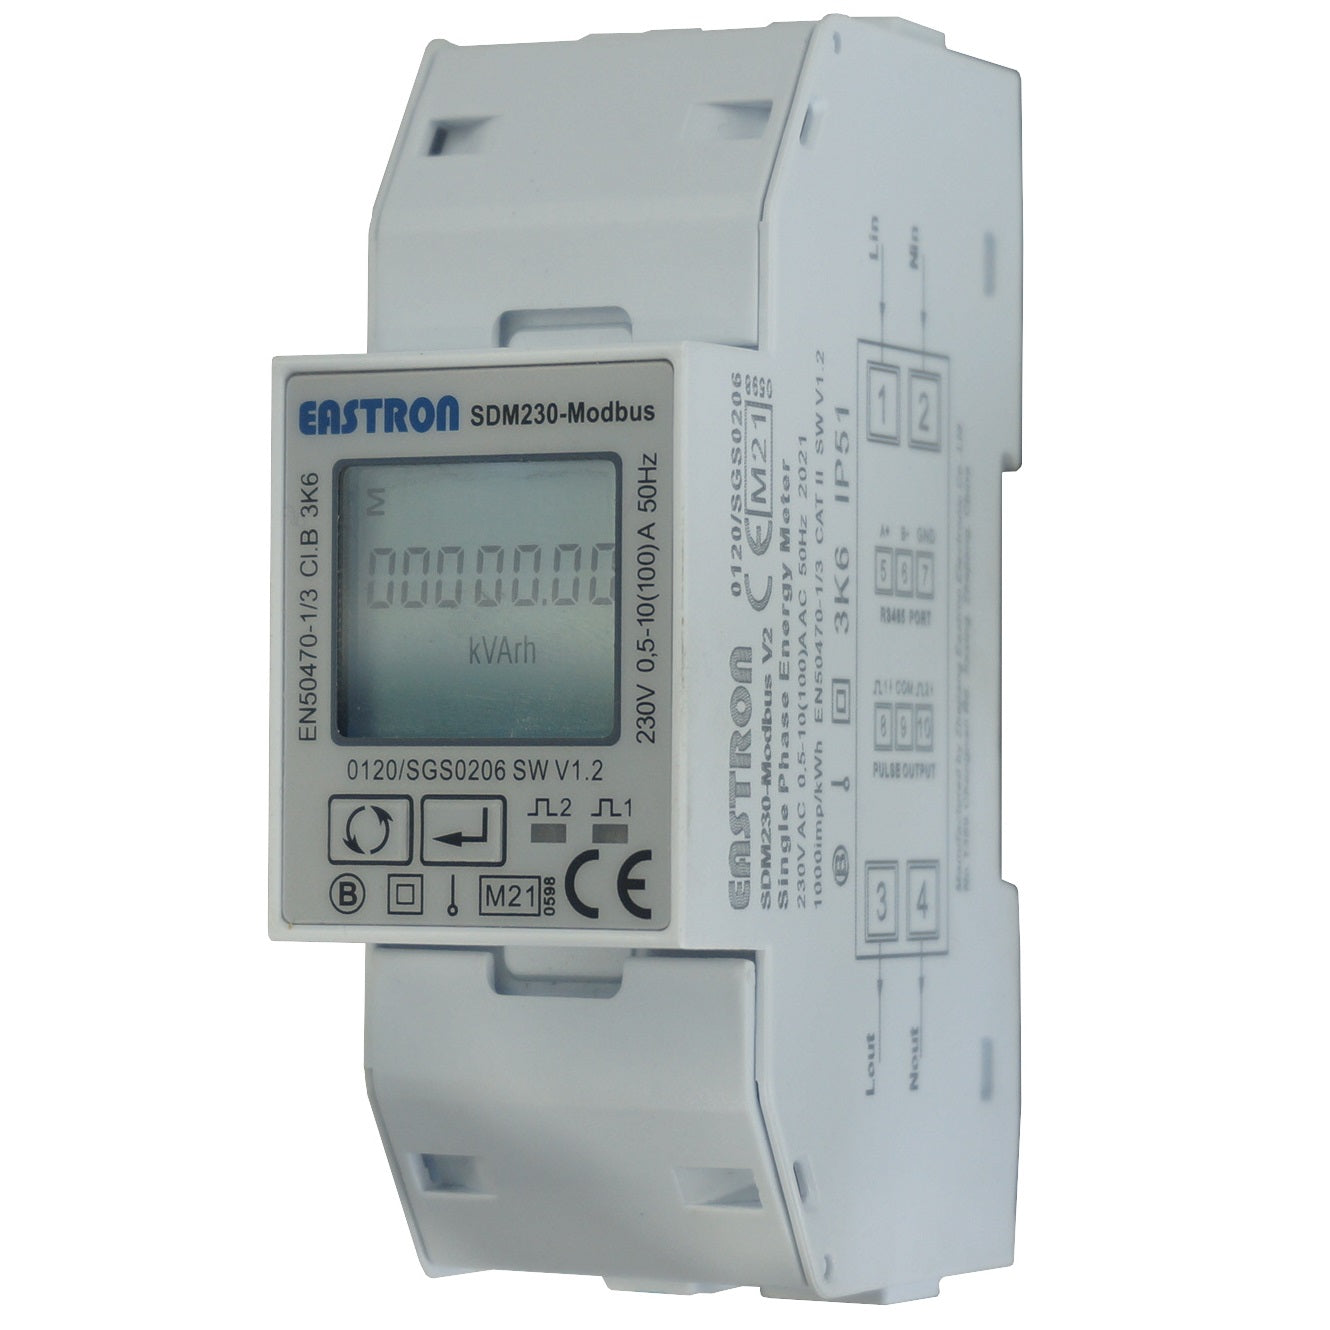 SDM230-LORAWAN-MID-AS923, DIN Rail Mount kWh Meter, Single Phase, 240VAC aux, Class 1, 100Amp Direct Connect, w/ 2 x pulse outputs and LoRaWaN AS923 Wireless Comms, MID Approved